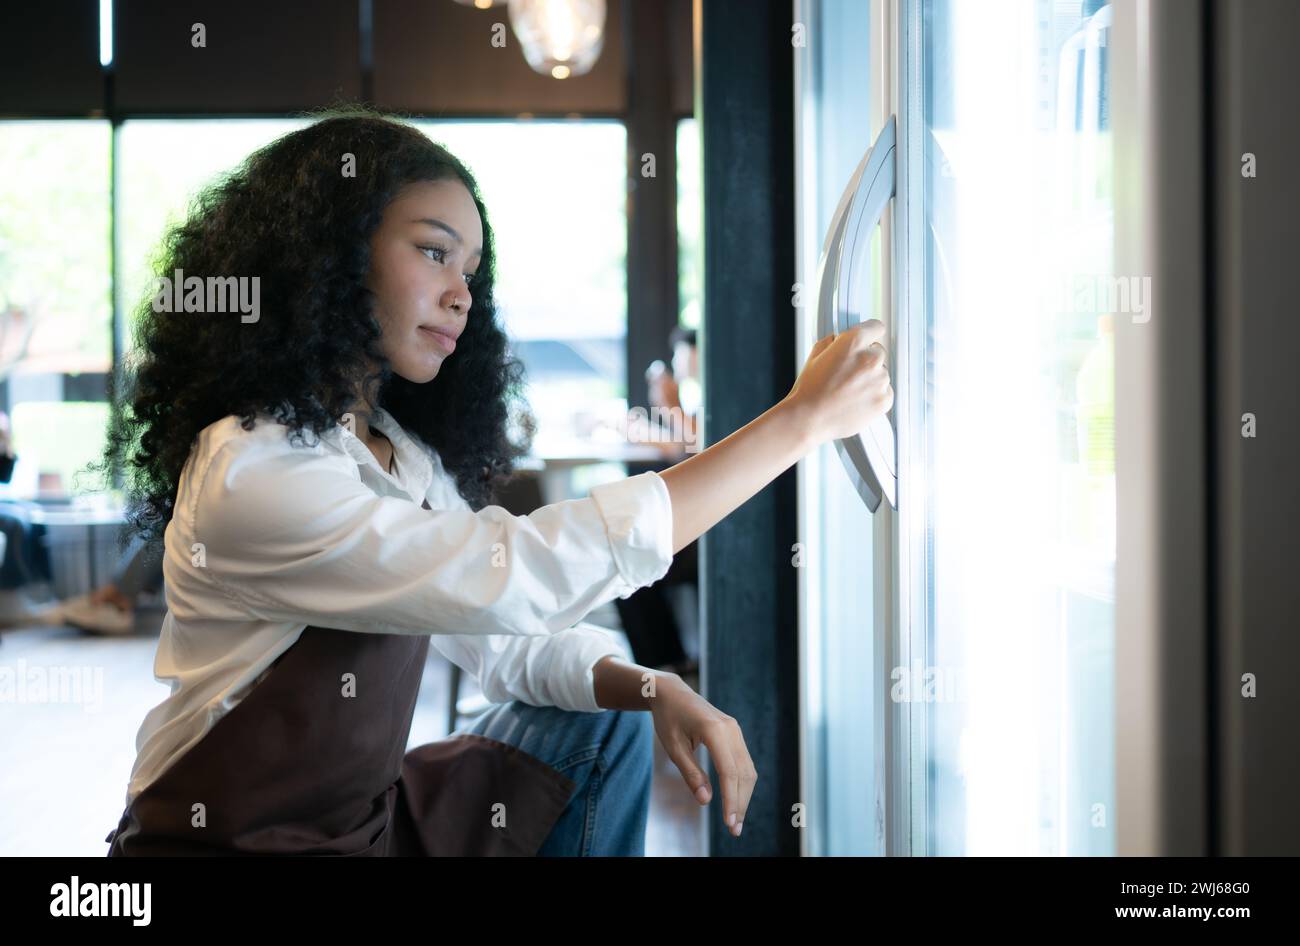 The owner of a coffee shop looks inside the refrigerator to retrieve chilled food to serve a customer. Stock Photo